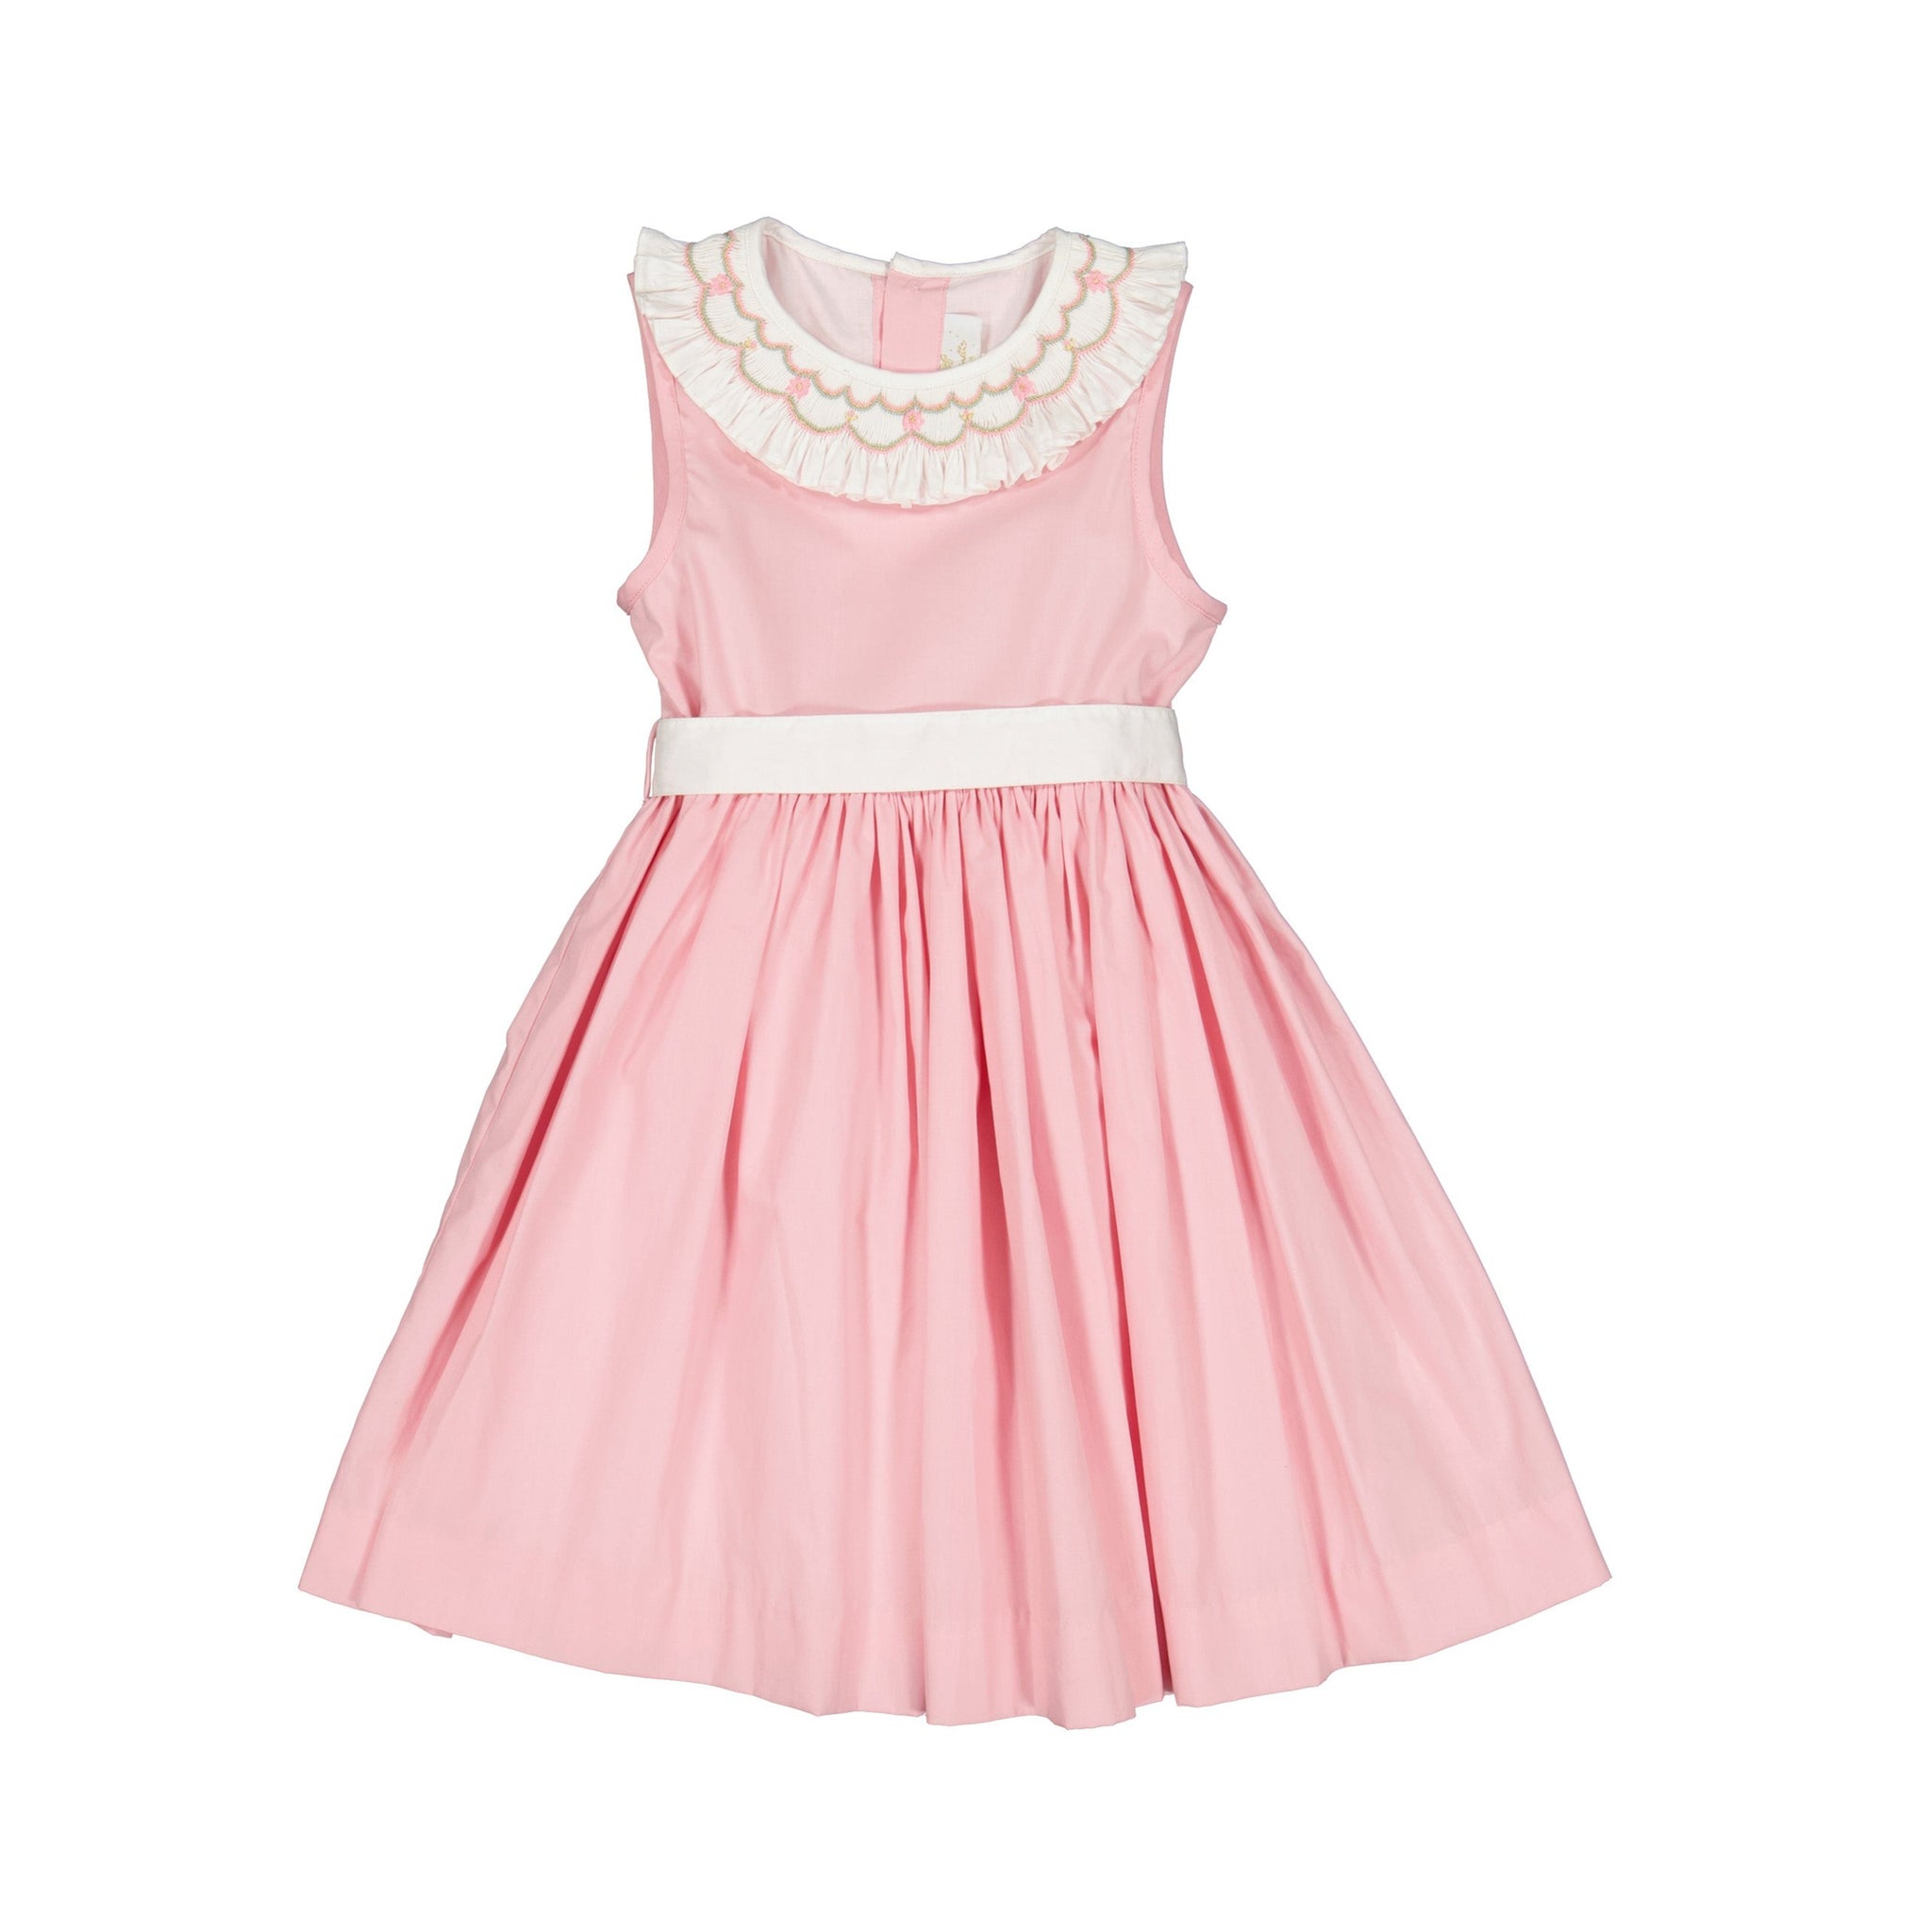 PEONY PINK SMOCKED DRESS WITH WHITE EMBROIDERED COLLAR